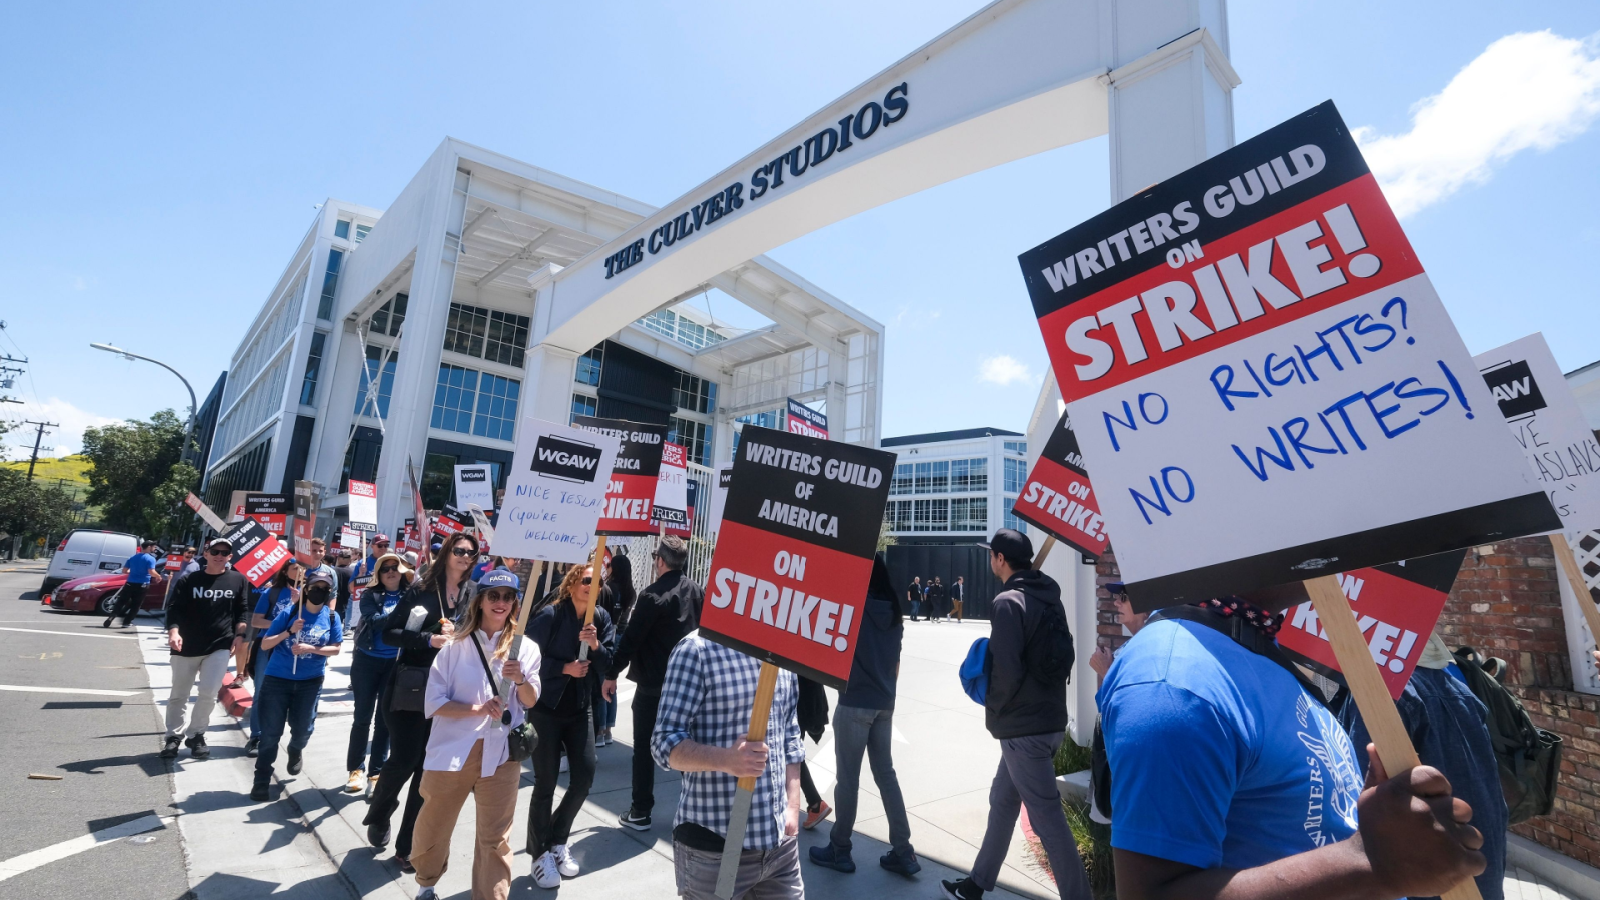 4 Ongoing Strikes in the U.S. Right Now